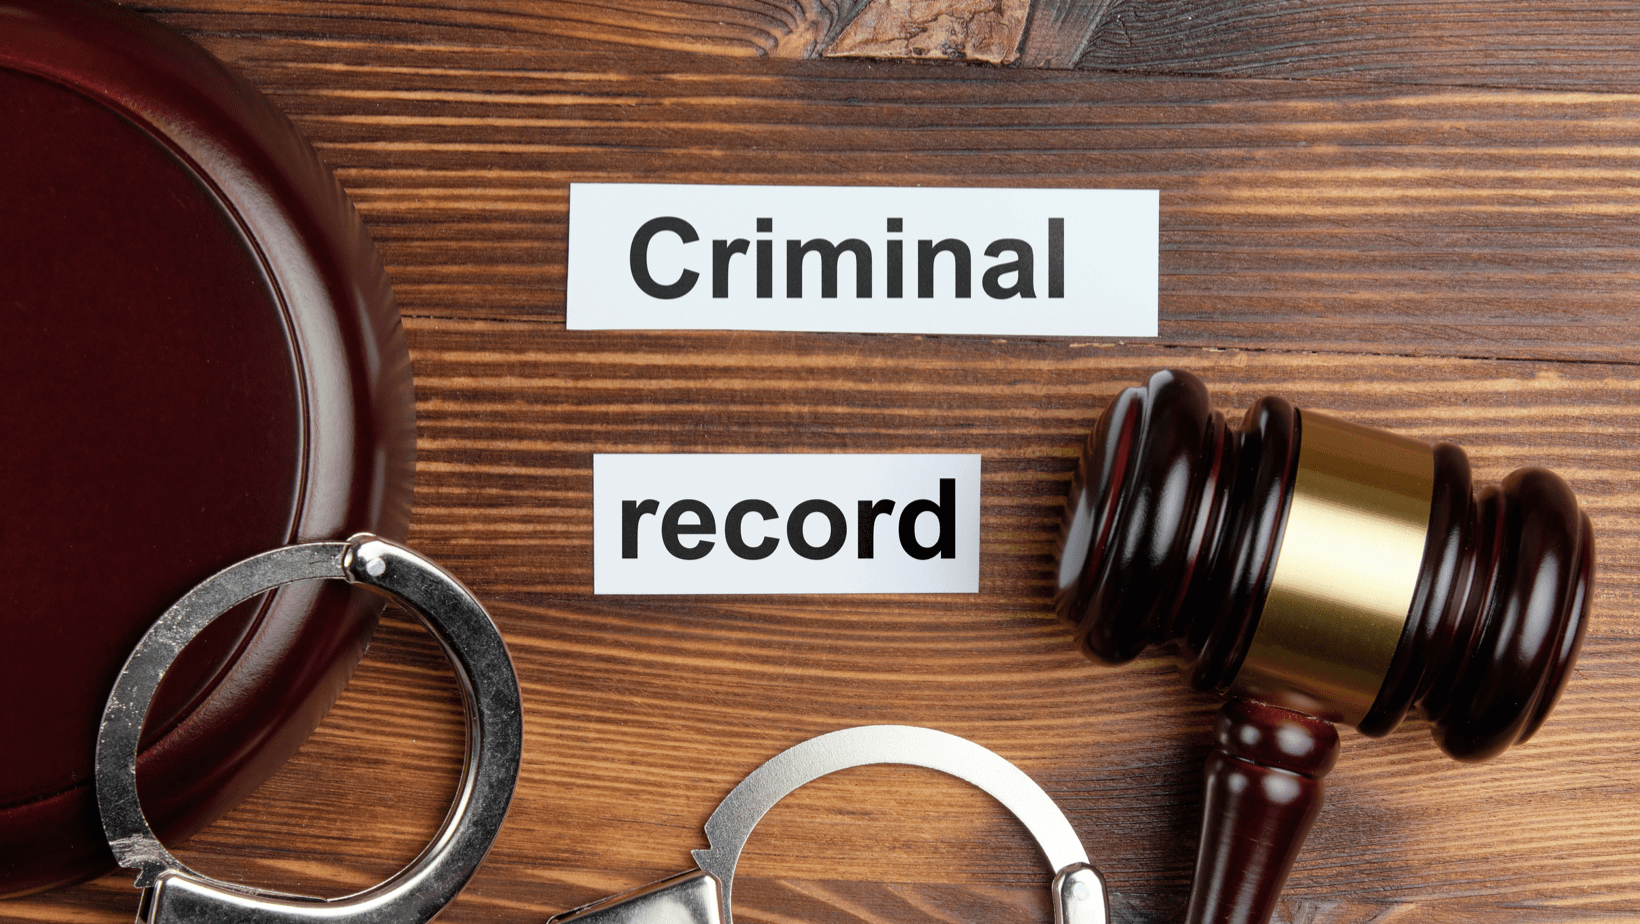 How Does BON Decide Whether to Accept or Reject an Applicant with a Criminal Record?